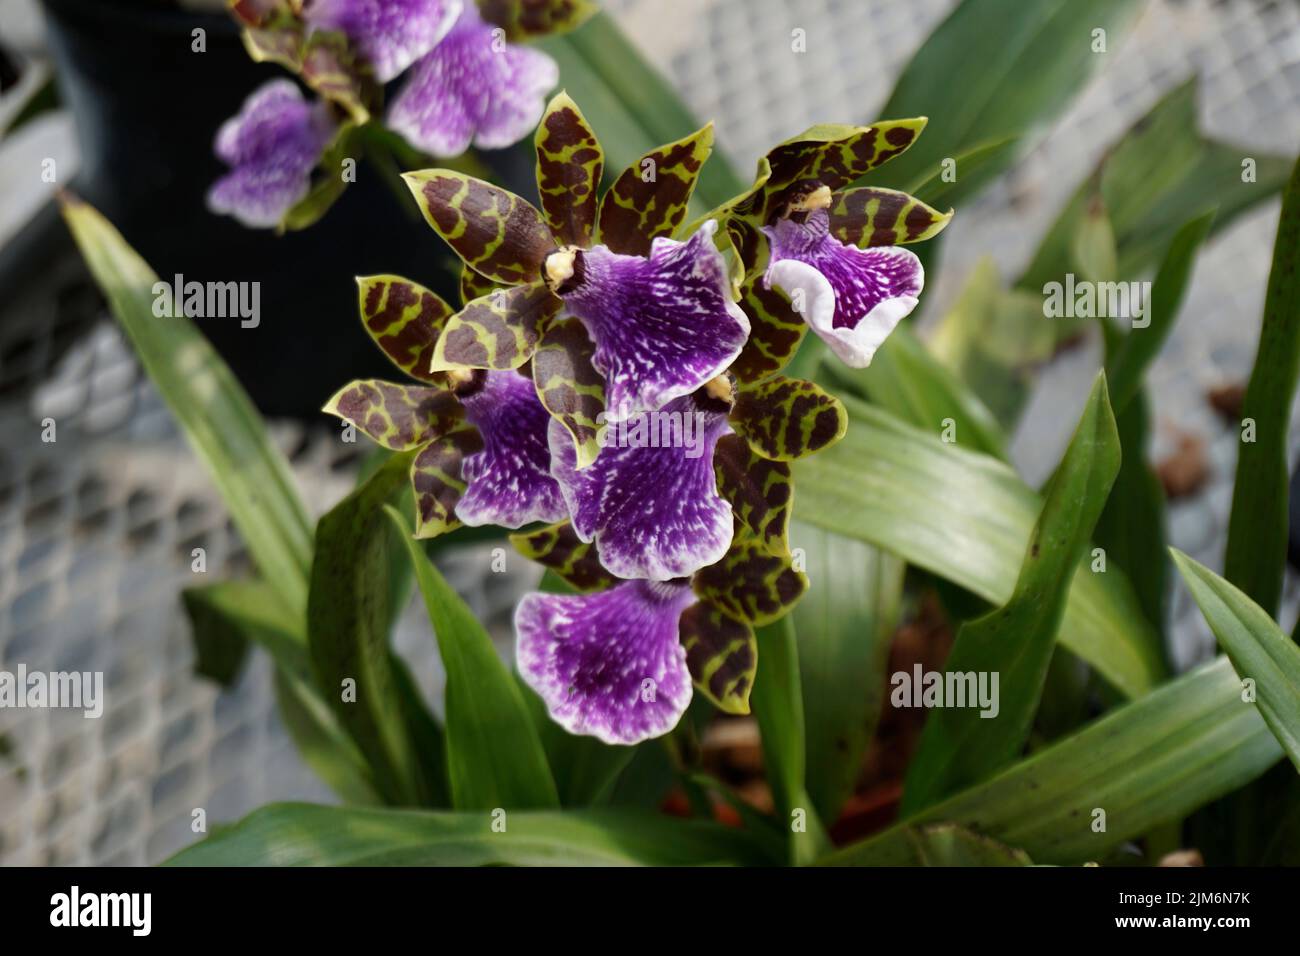 A closeup shot of beautiful purple zygopetalum flowers on the background of green leaves Stock Photo